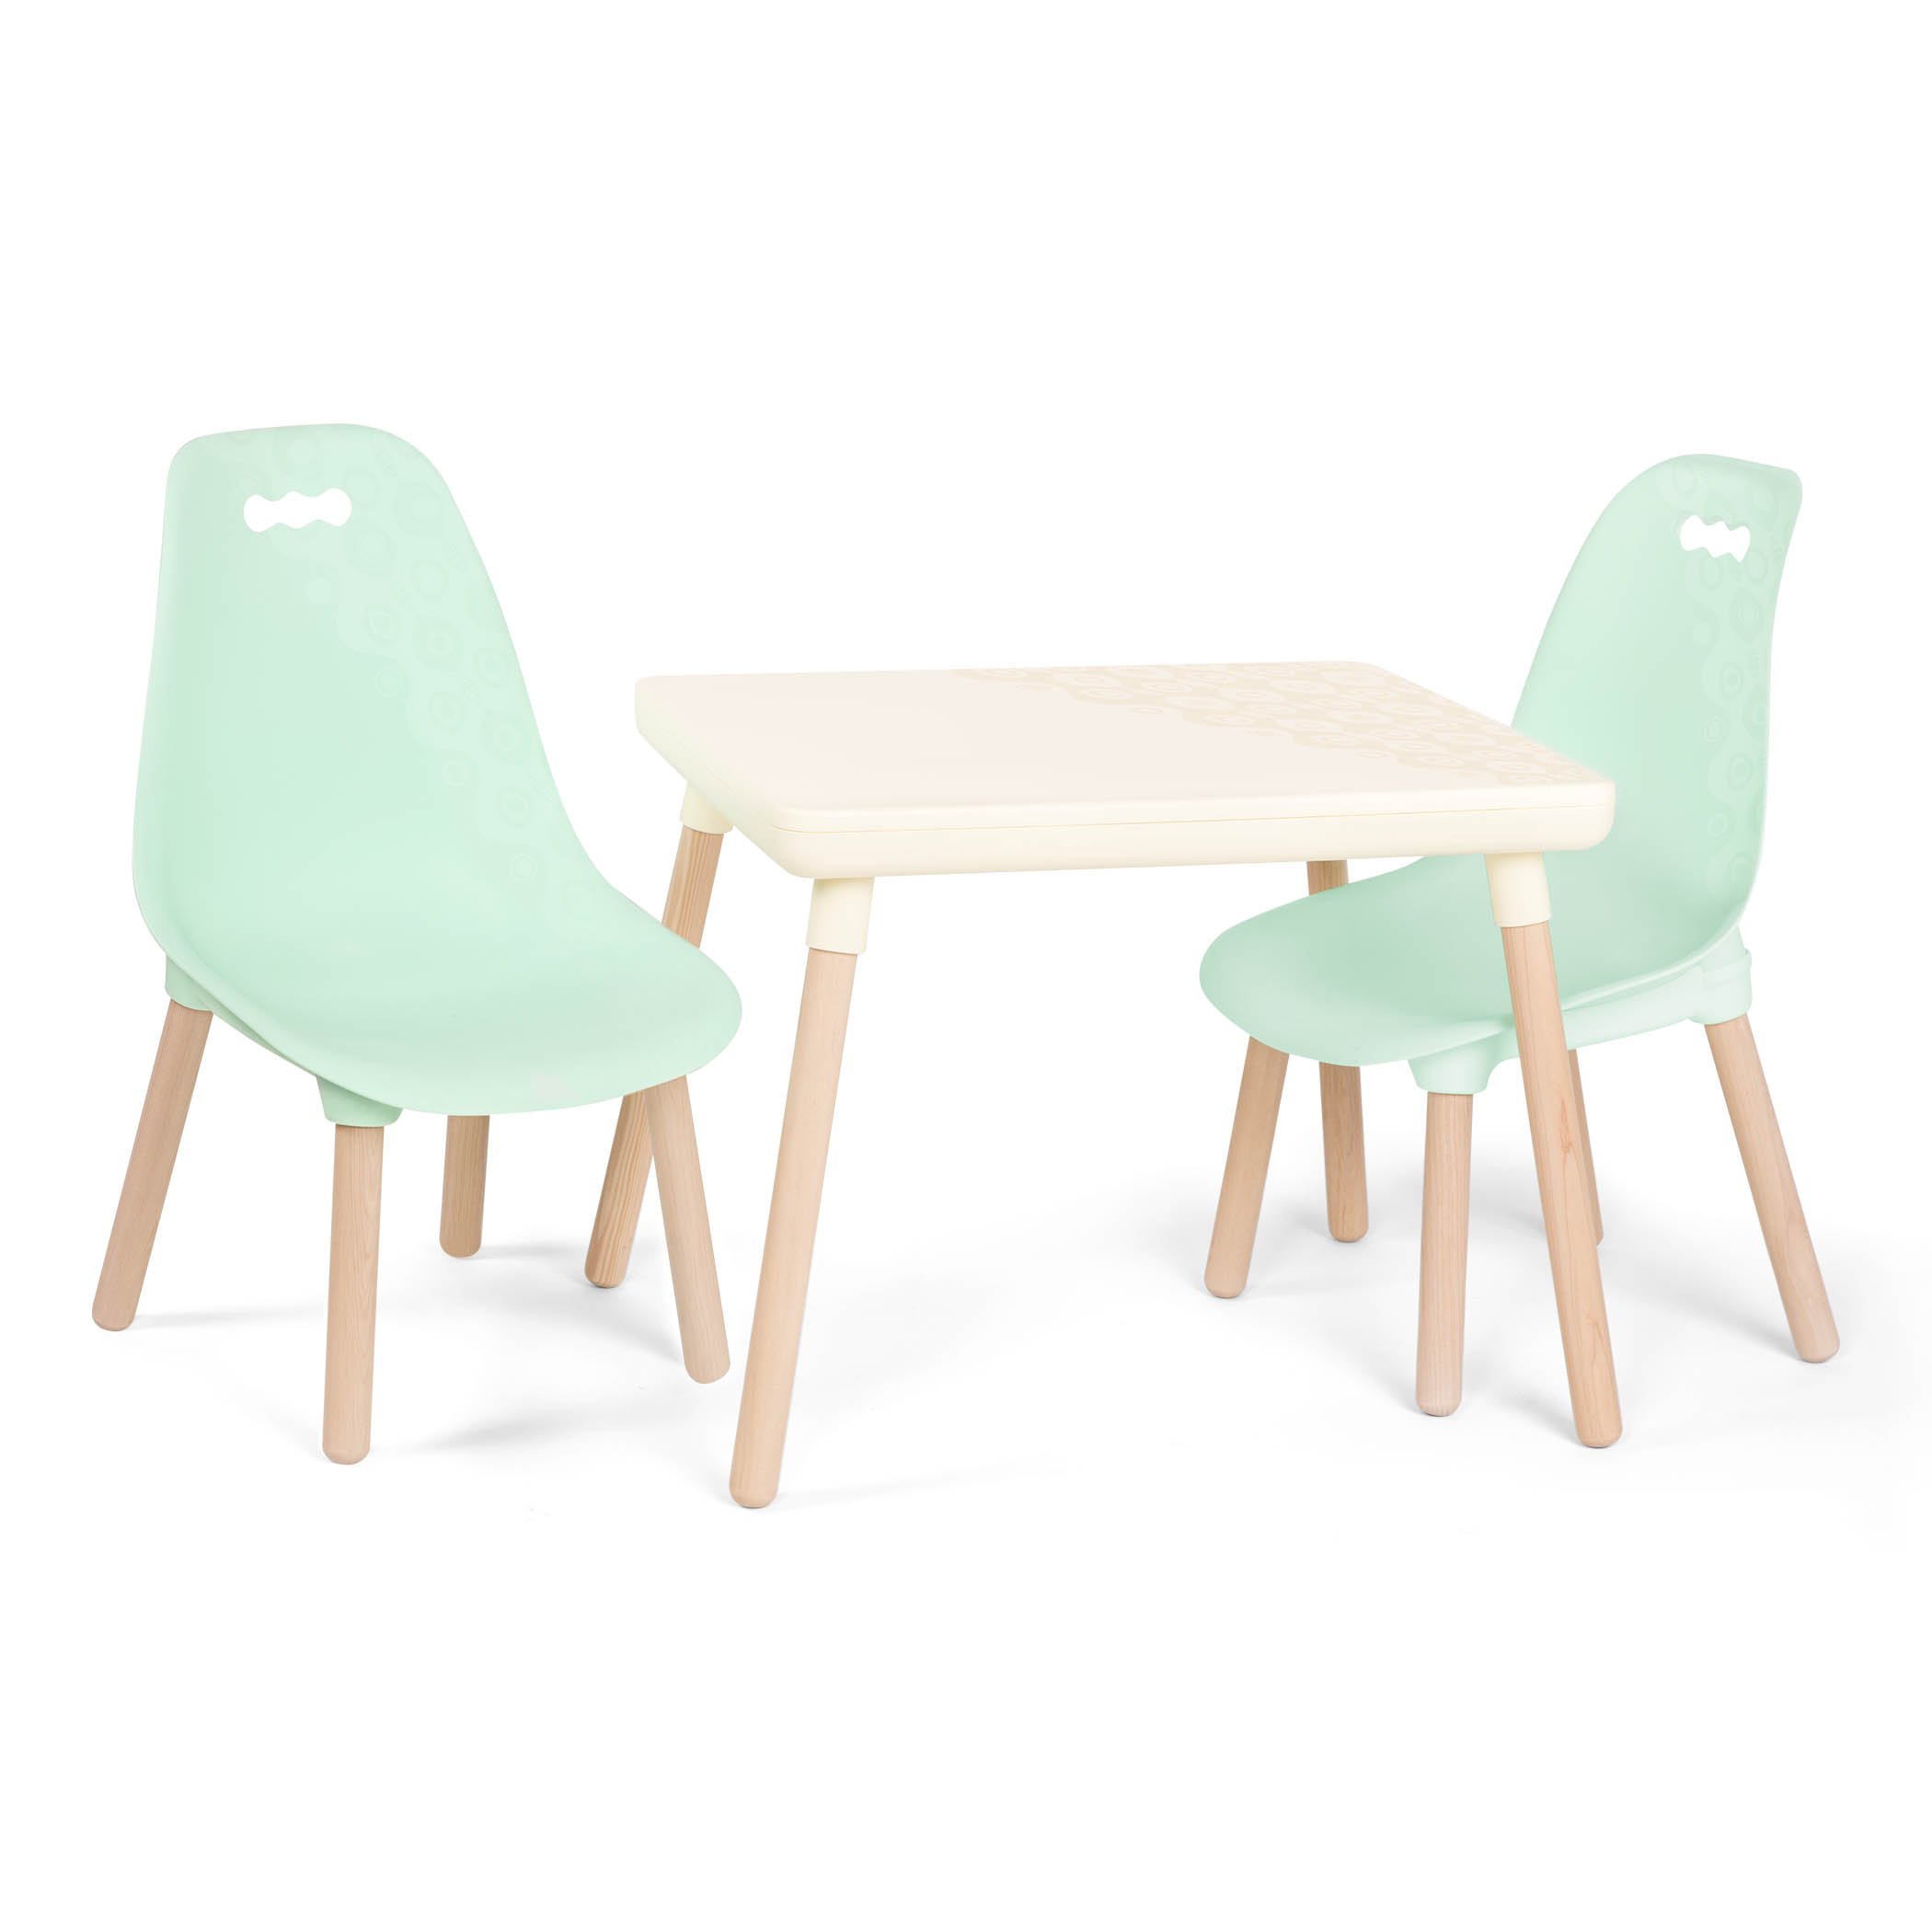 B. Spaces by Battat – Kids Furniture Set – 1 Craft Table & 2 Kids Chairs with Natural Wooden Legs (Ivory and Mint) $90.53